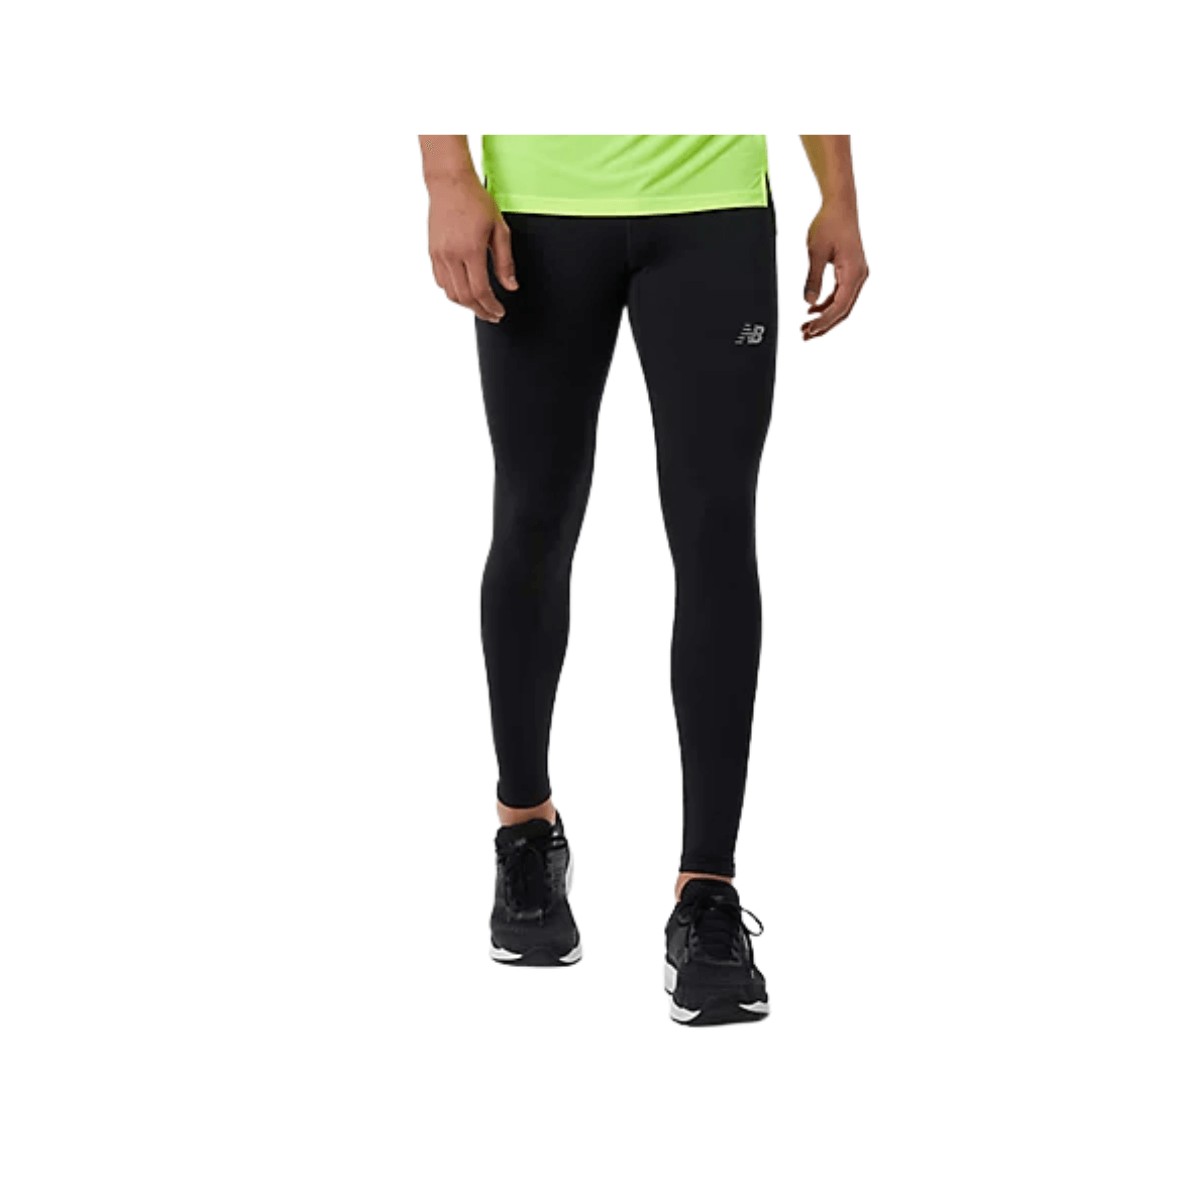 New Balance Accelerate Tight  Black, Size S